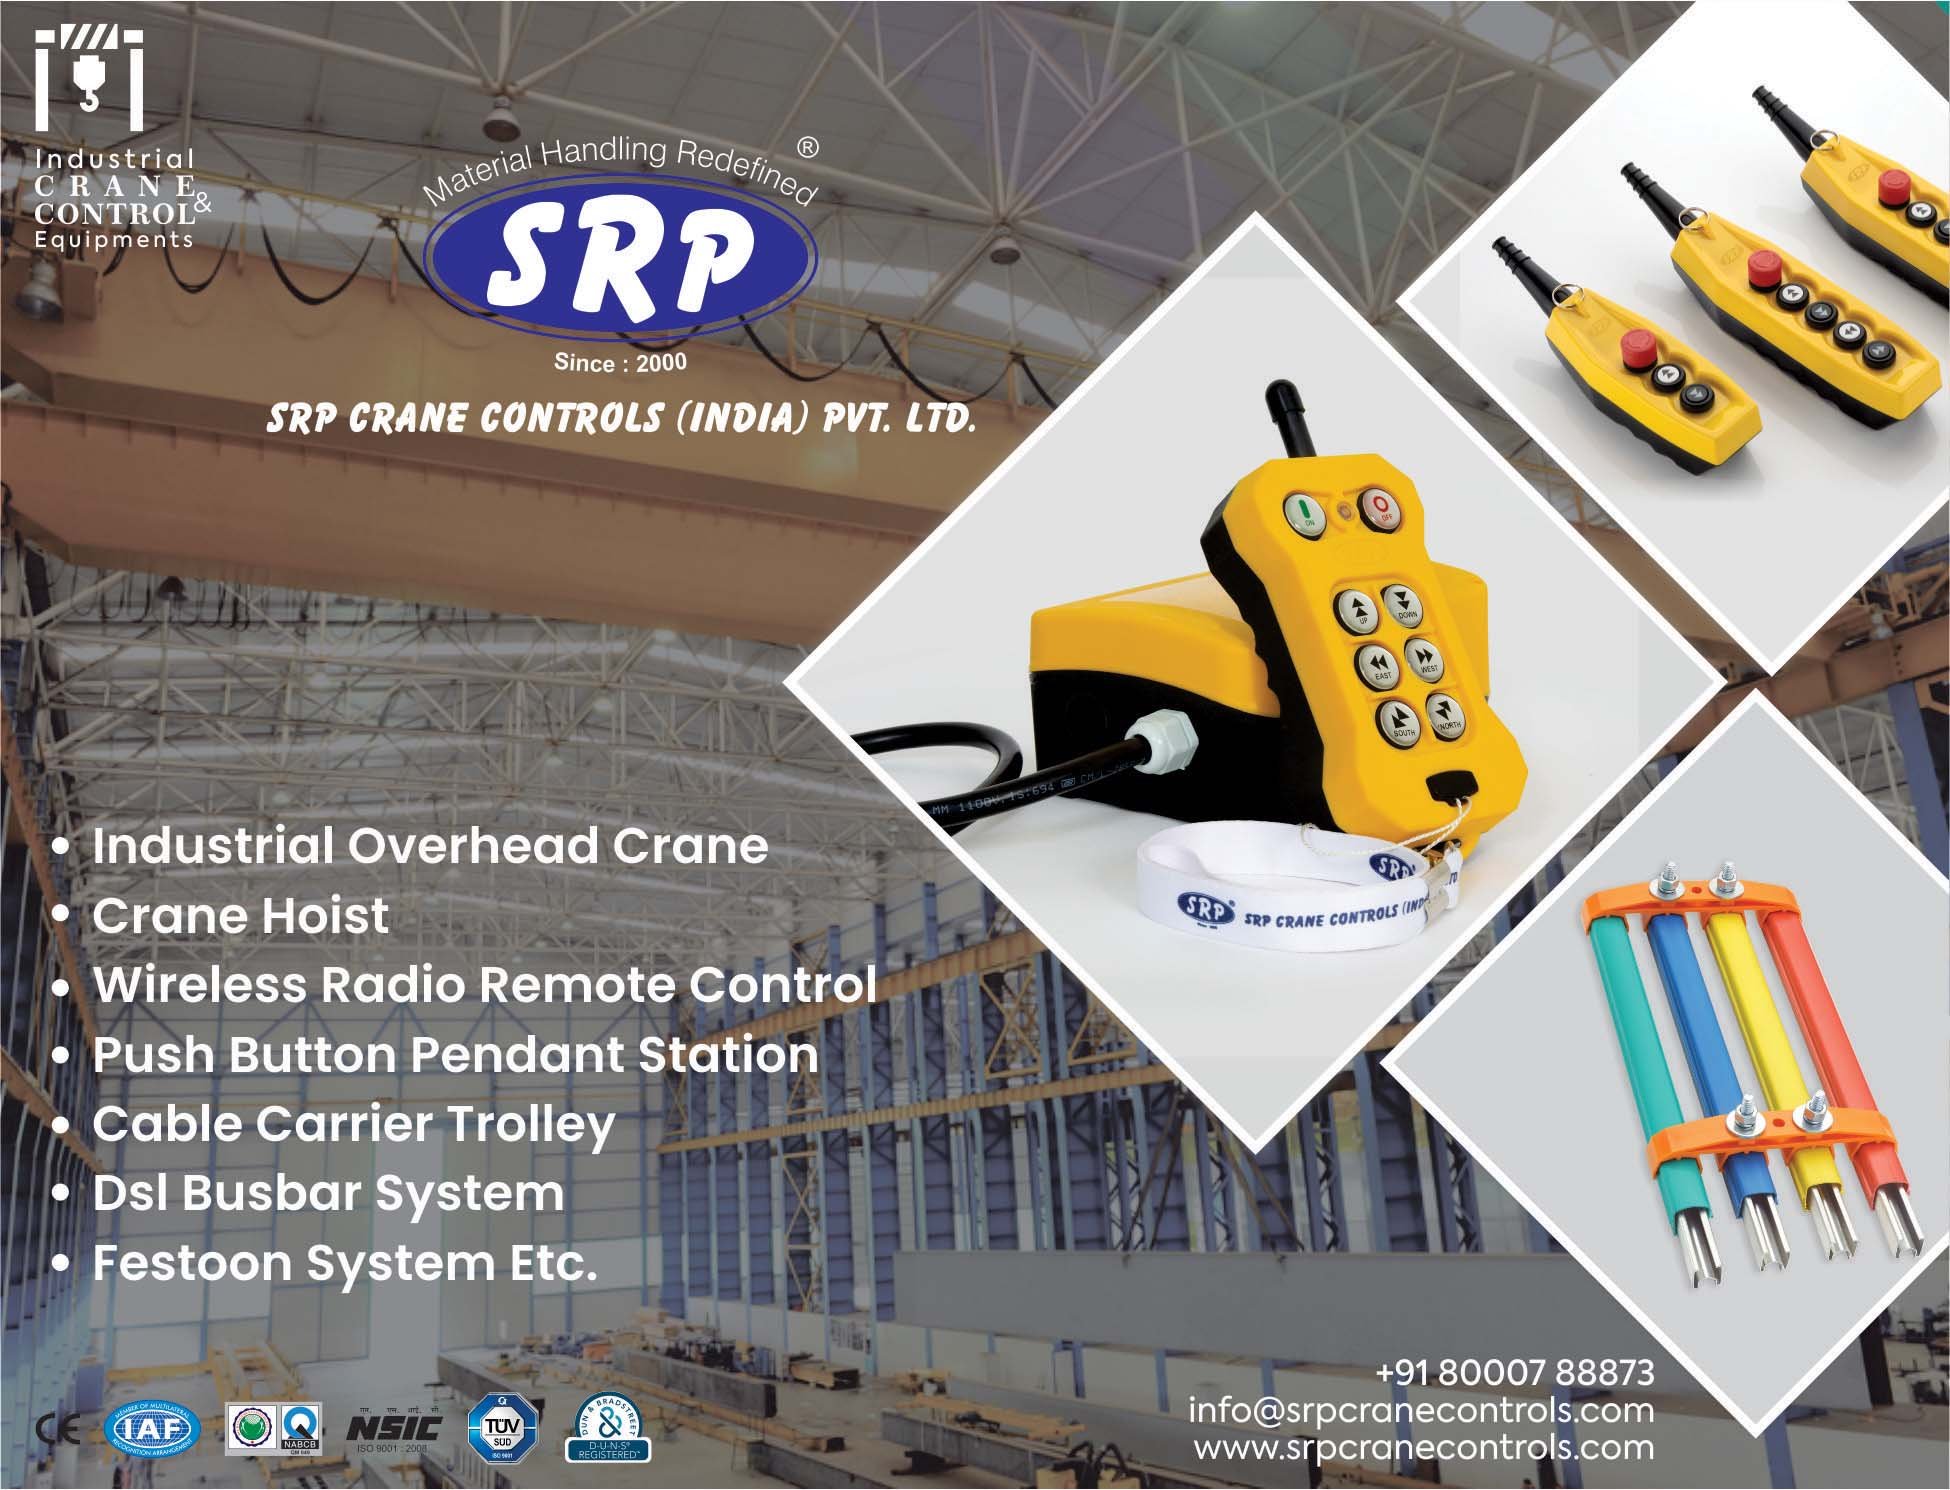 SRP Crane Controls (India) Private Limited: Leading the Way in Crane Control Innovation and Excellence